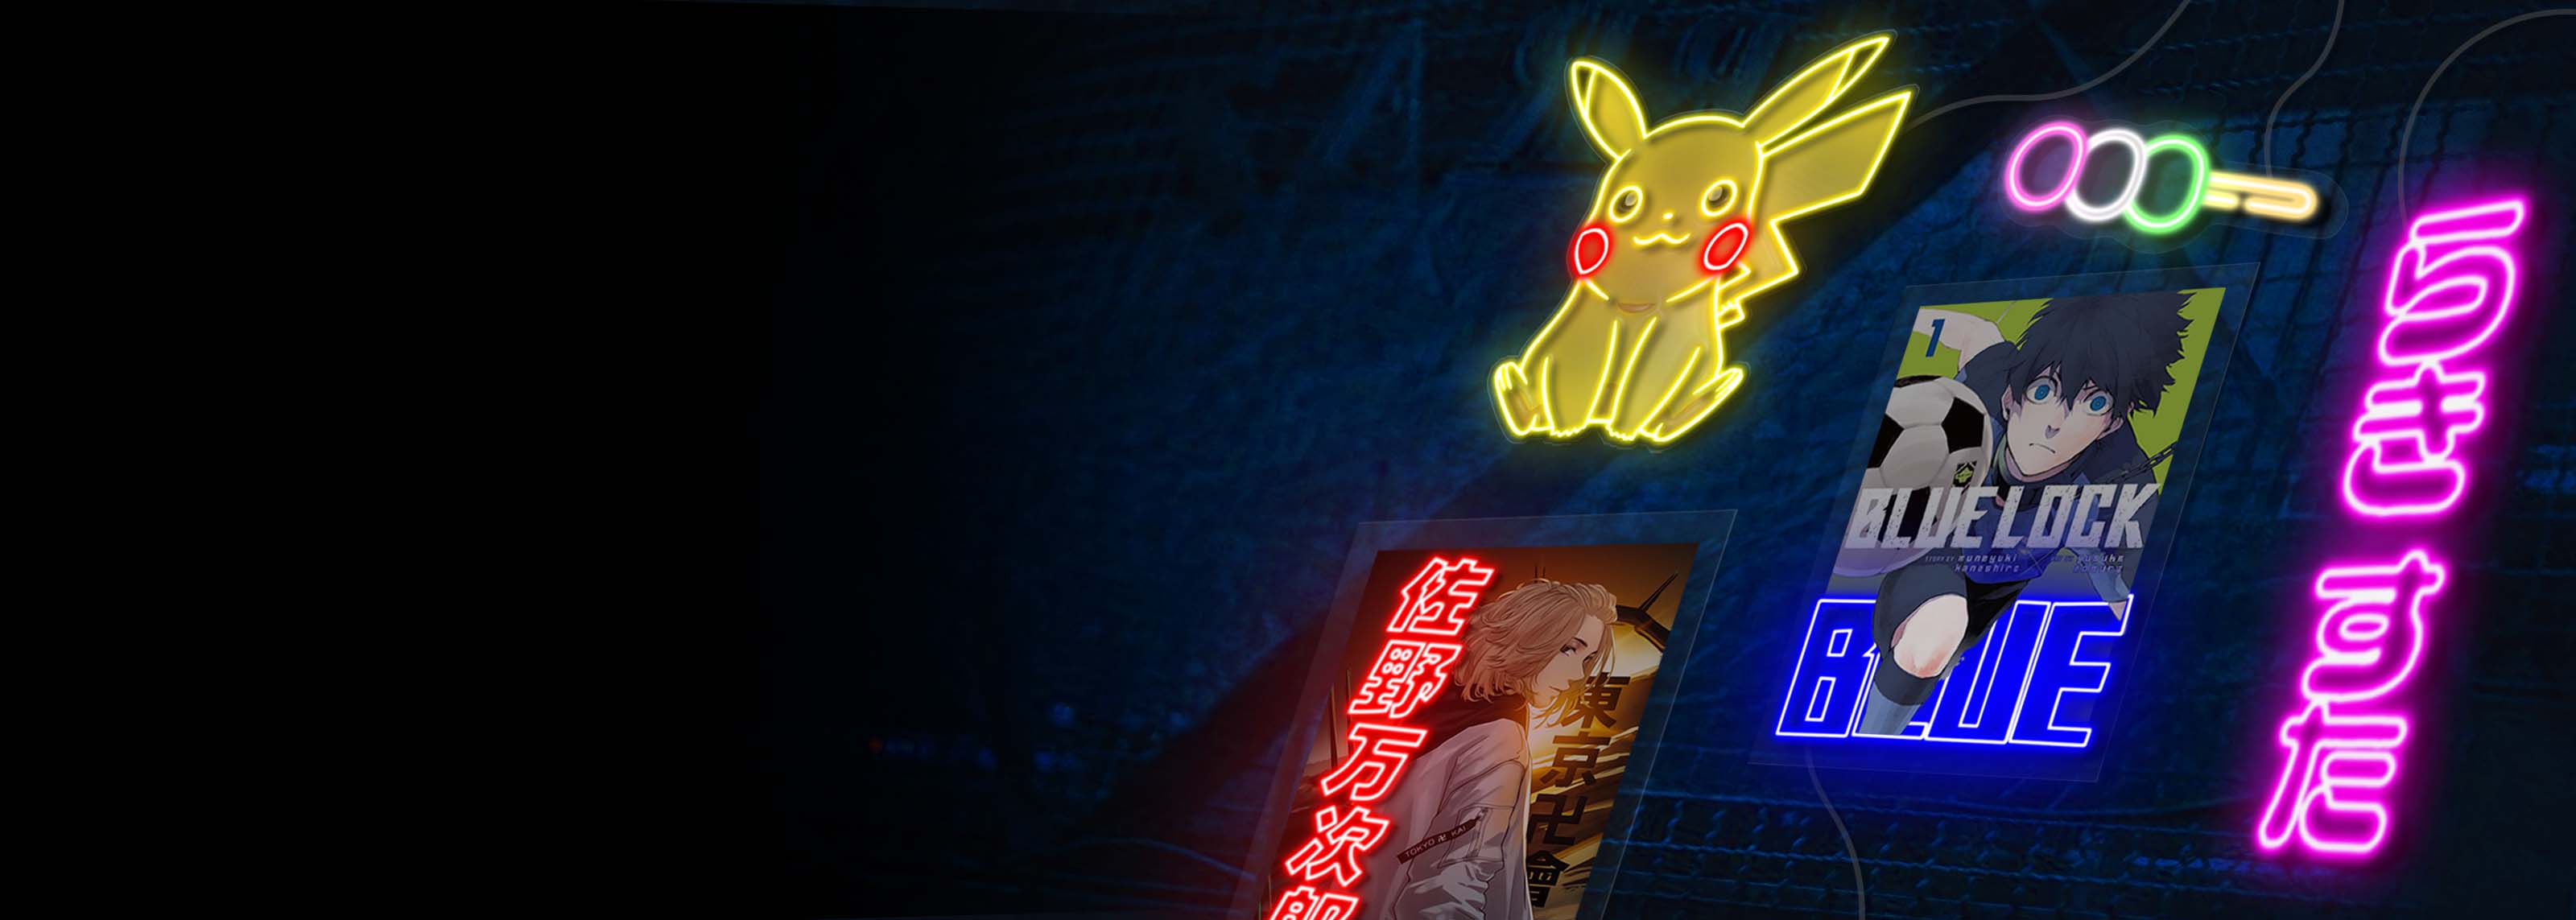 Anime neon signs and anime LED neon posters glowing on a wall